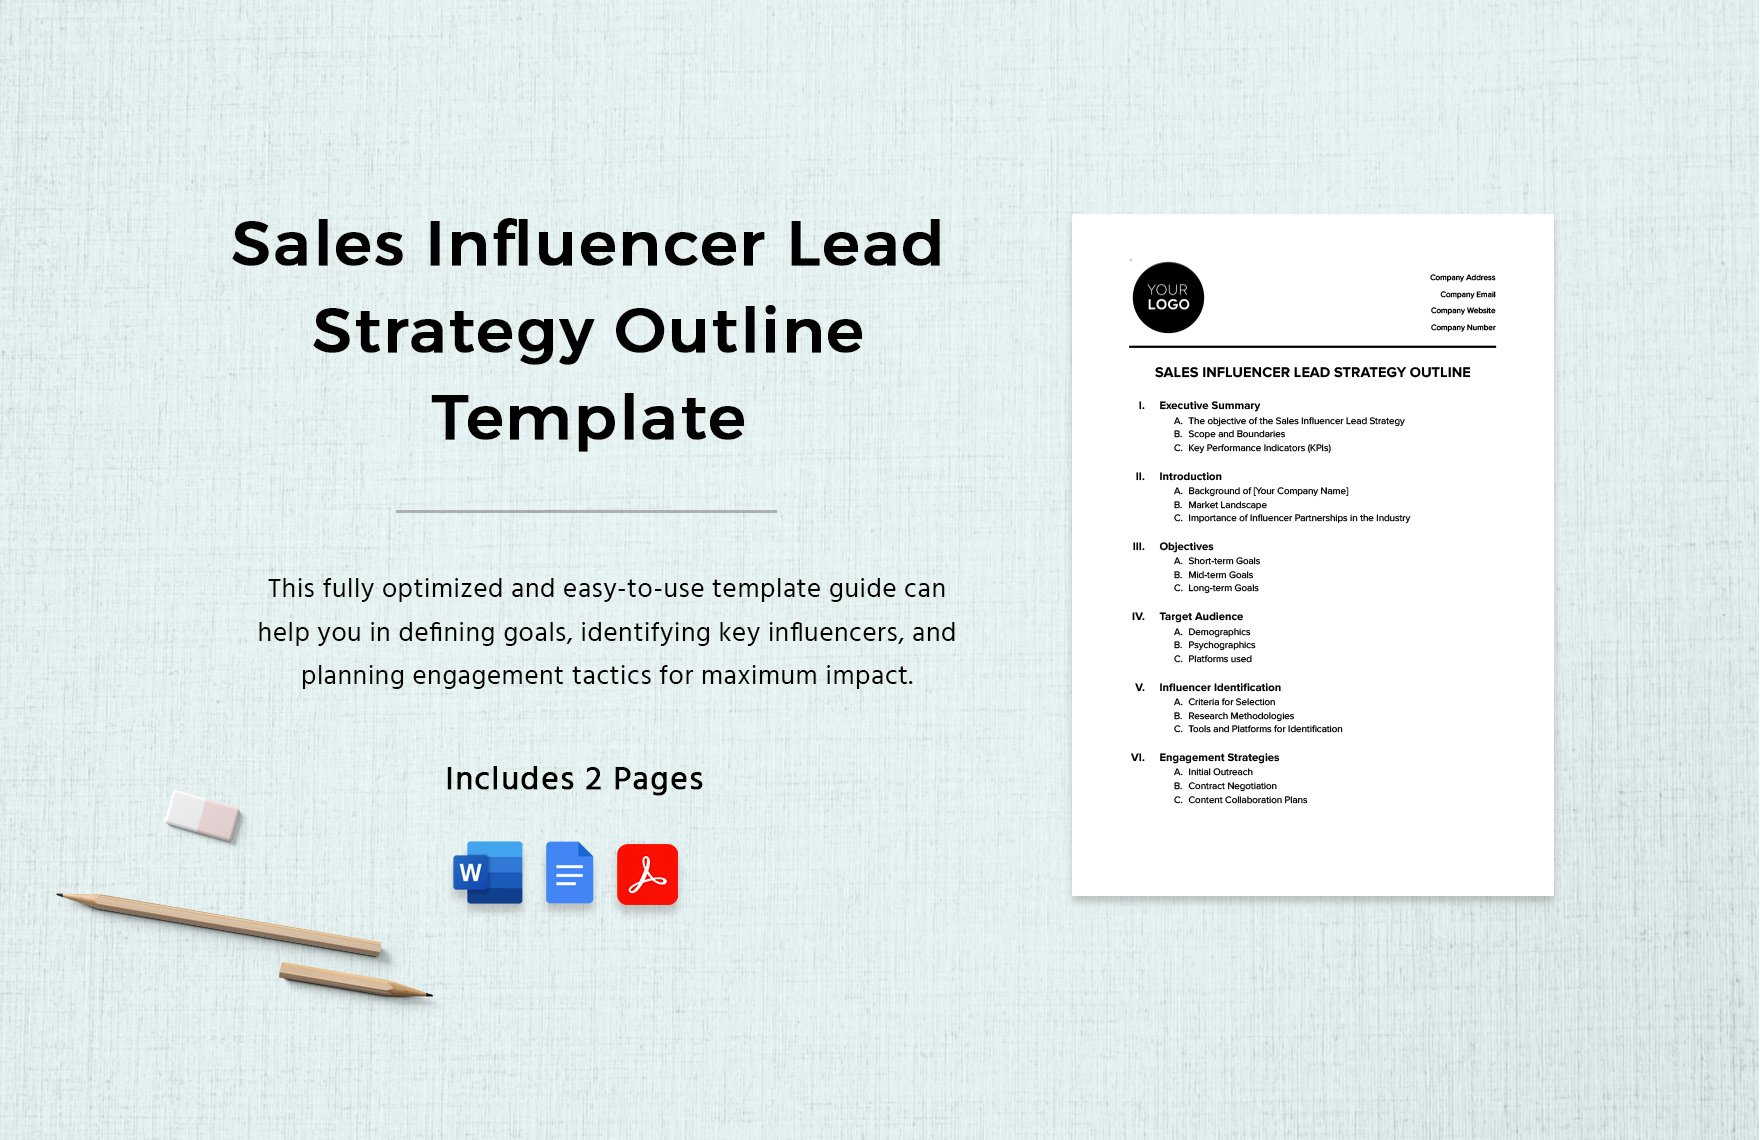 Sales Influencer Lead Strategy Outline Template